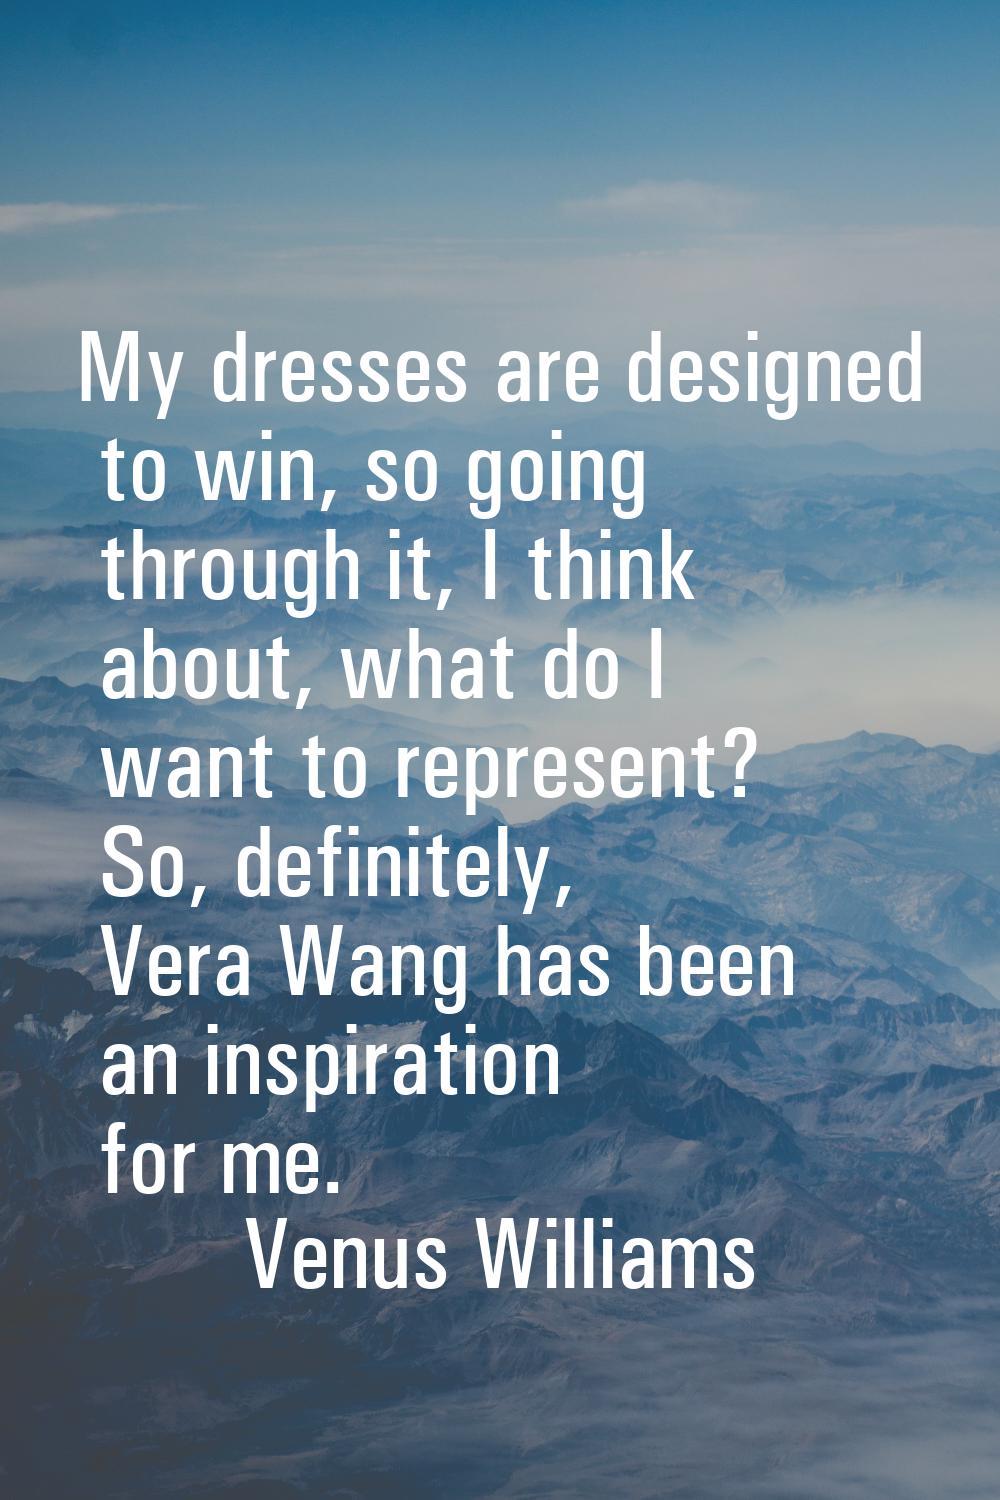 My dresses are designed to win, so going through it, I think about, what do I want to represent? So